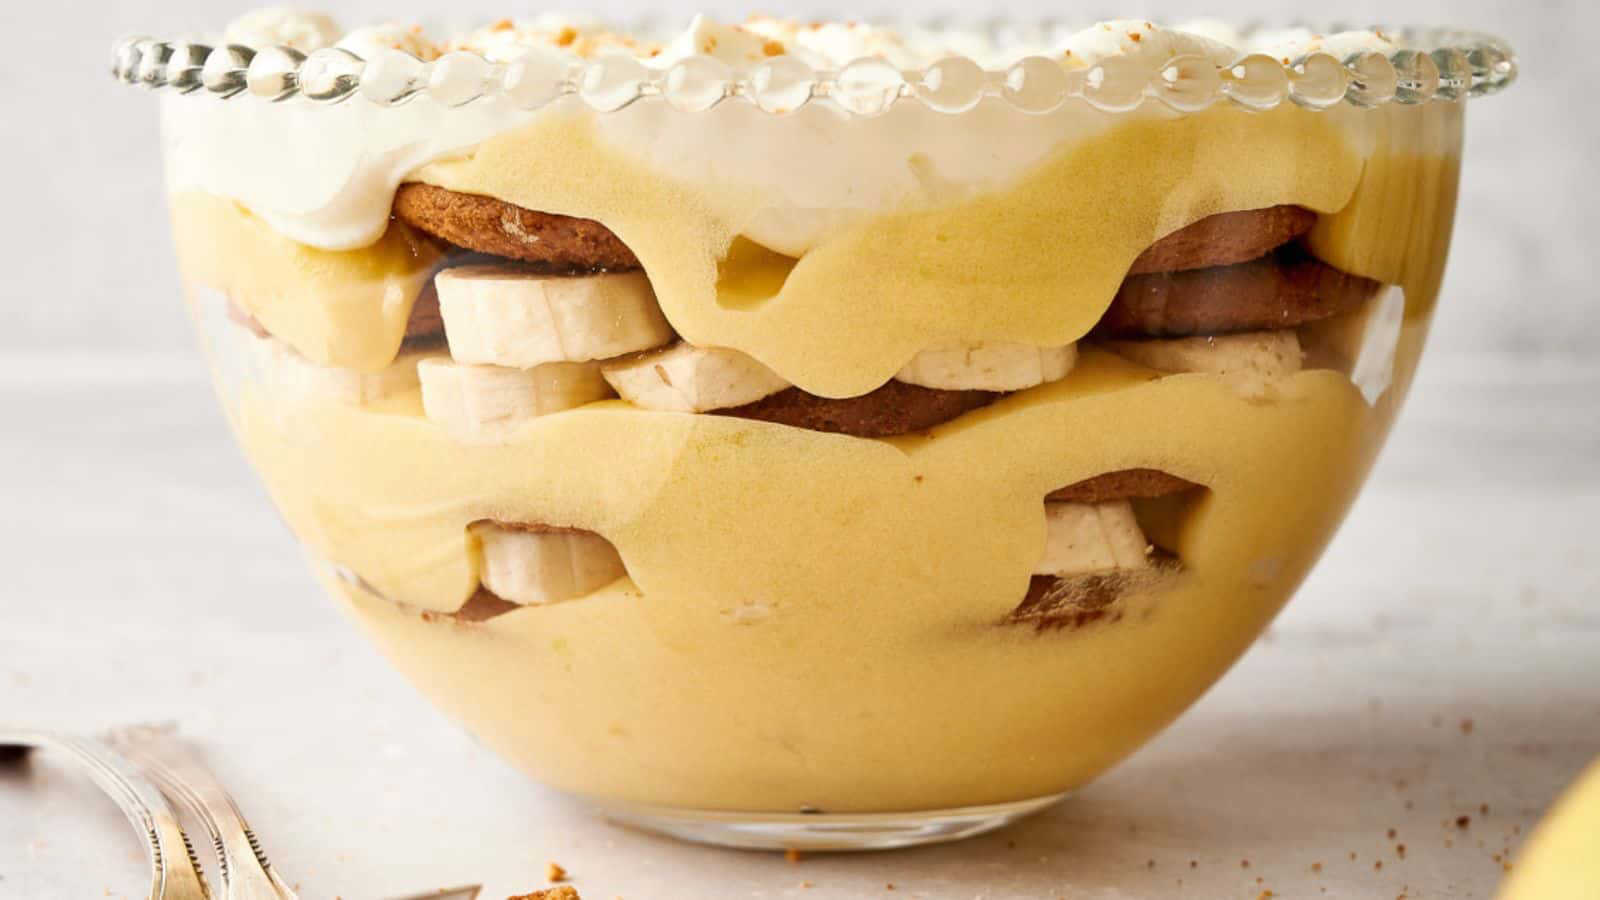 21 Crowd-pleasing Desserts Your Whole Family Will Cheer For